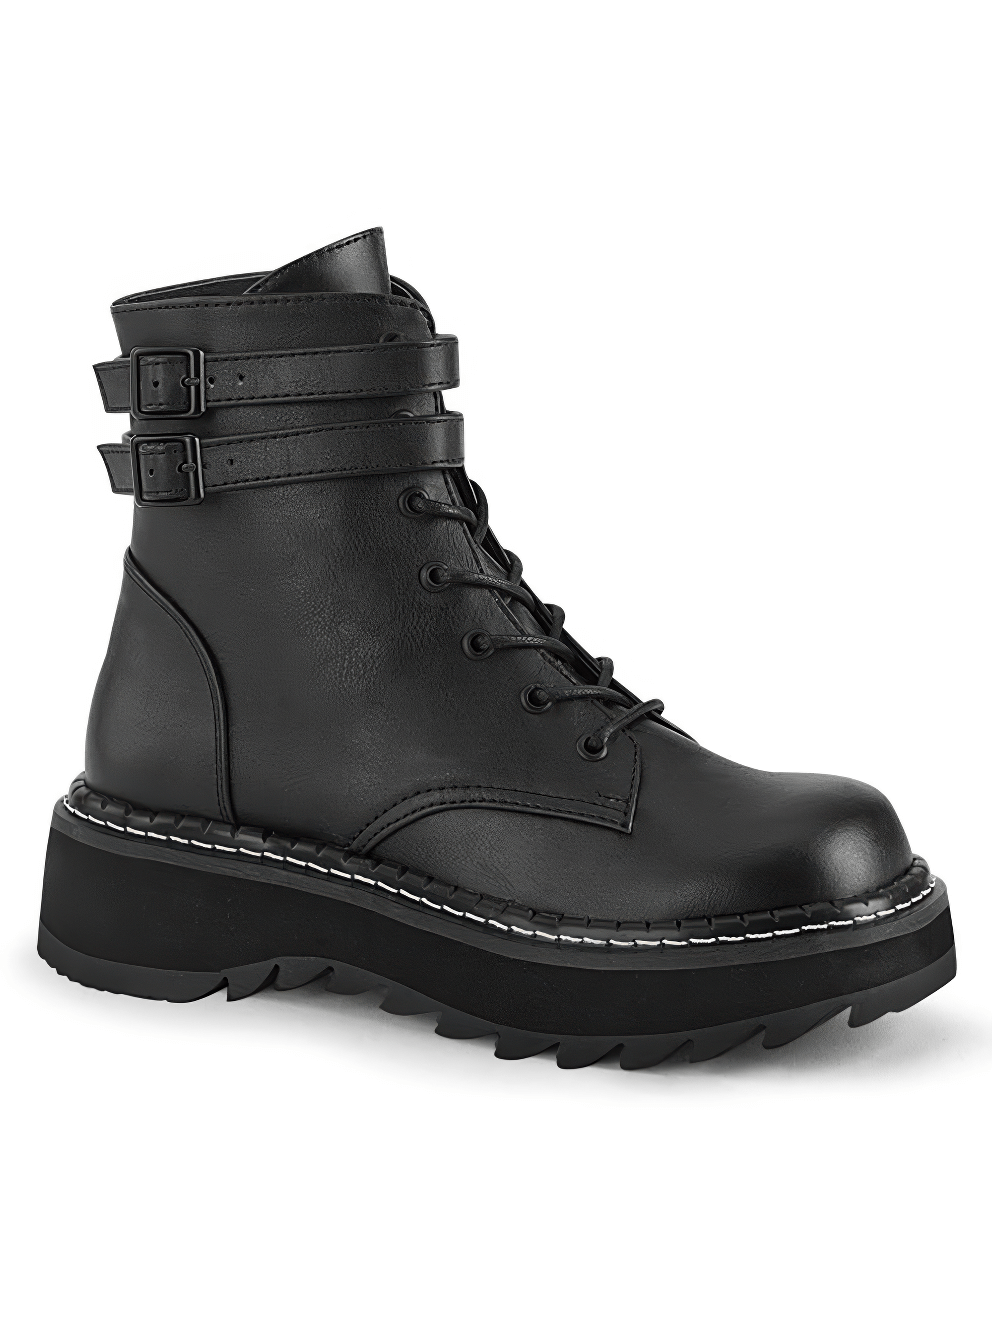 DEMONIA Women's Lace-Up Ankle Boots with Buckle Straps